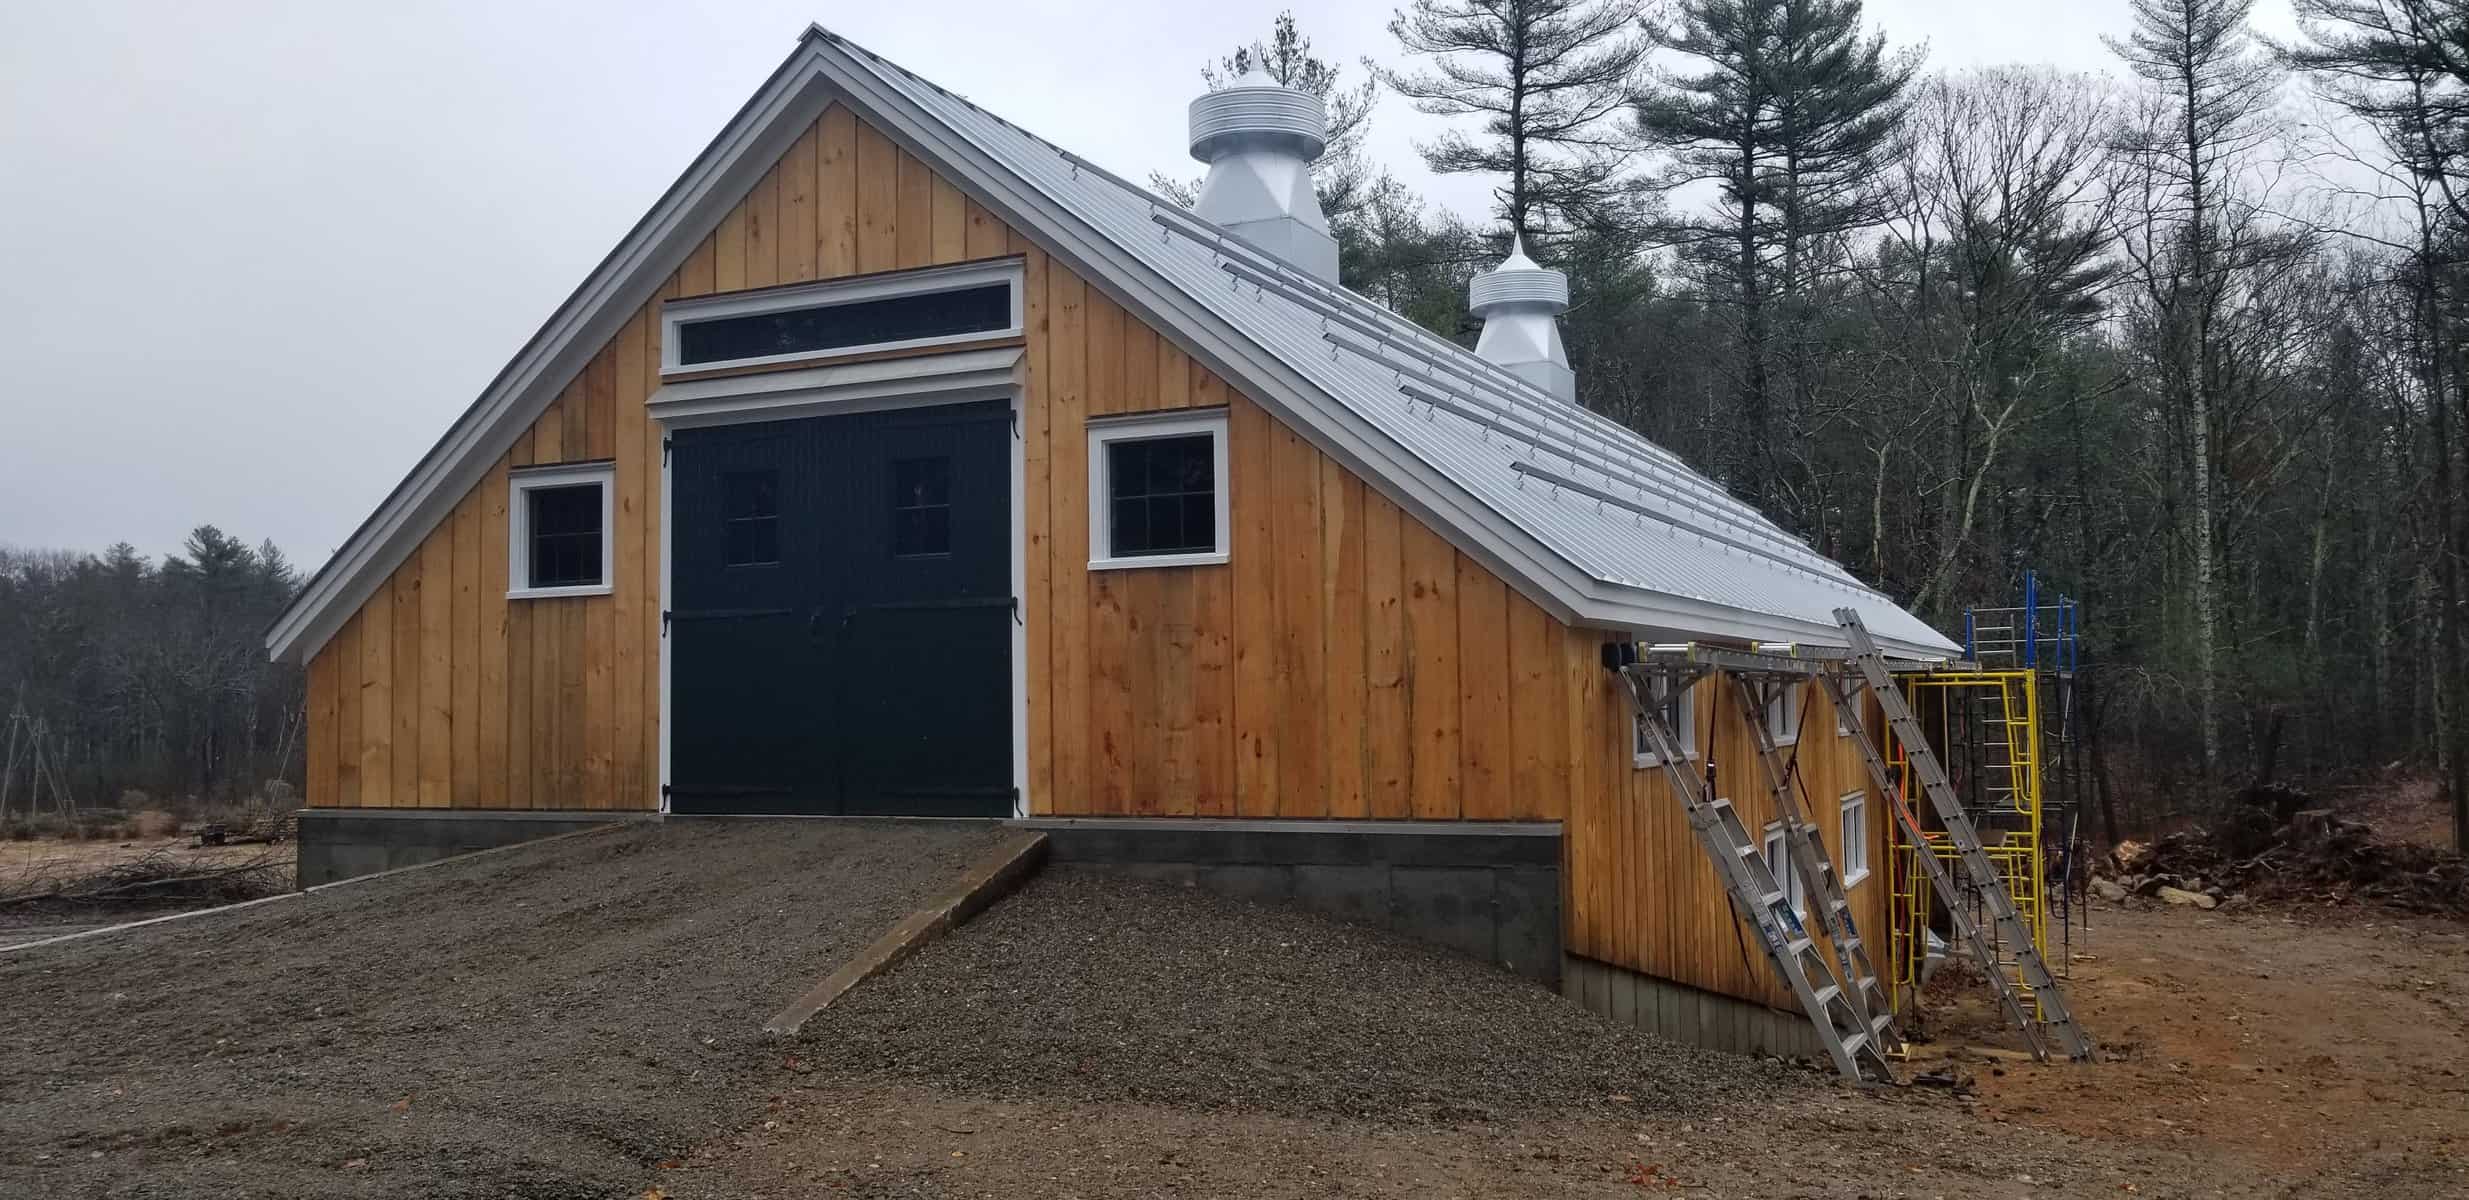 A new additional "ibarn" was built in 2018 to store farm implements and equipment